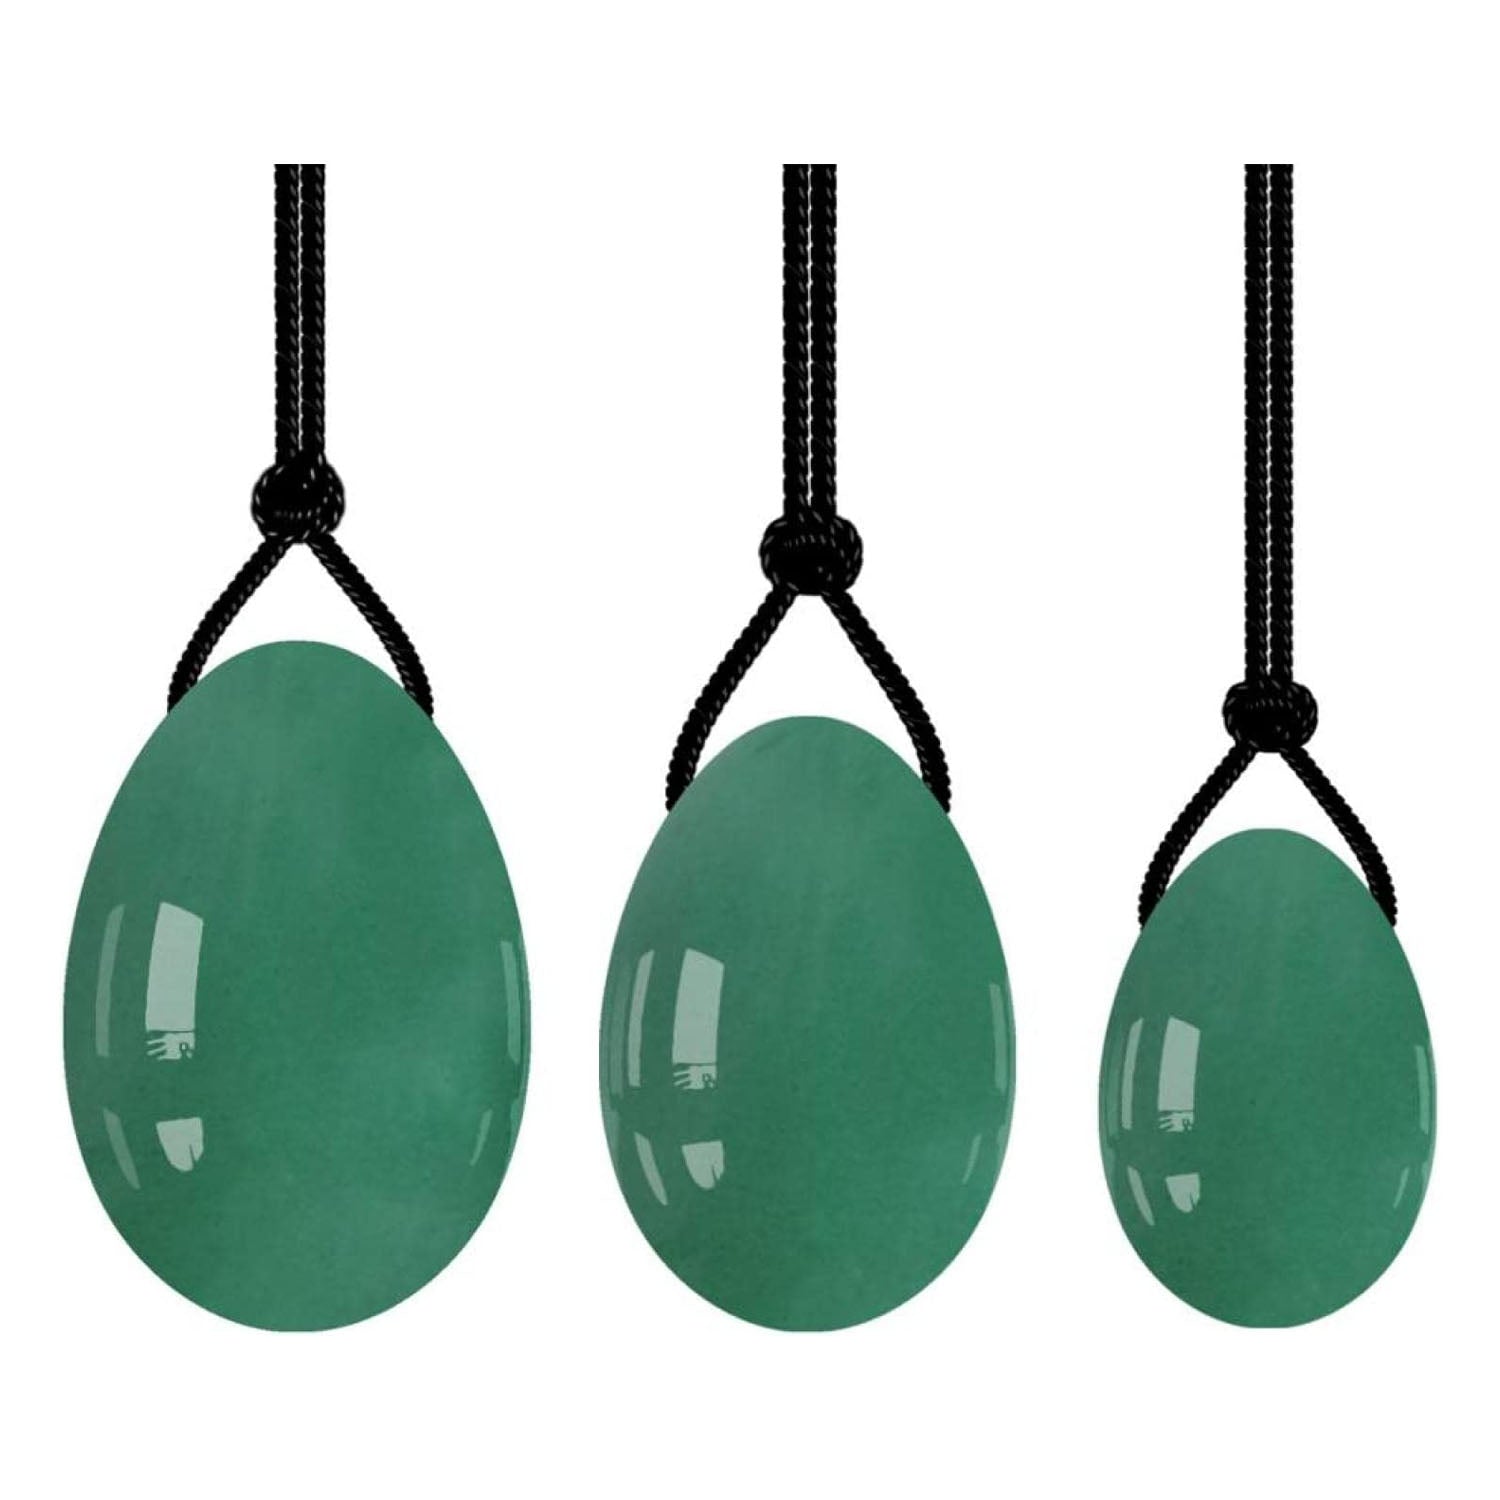 Natural Obsidian Yoni Egg Jade Eggs Women Kegel Exerciser Ball Crystal Yoni Wand Kegel Eggs Aoxily CHN, Inc. All Rights Reserved.